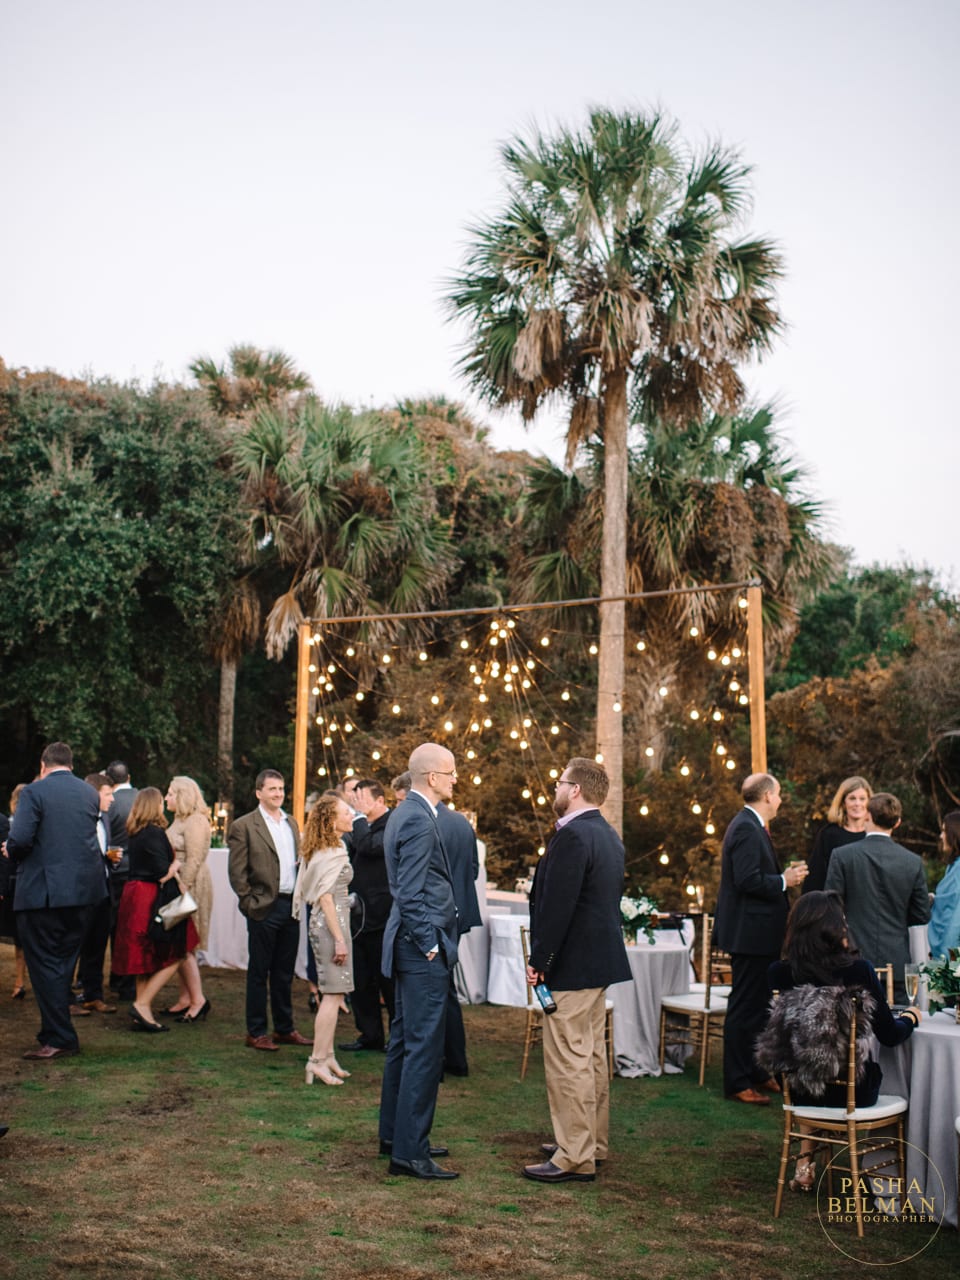  Elizabeth and Michael - Charleston Wedding Photos by Pasha Belman Photographers. The Sanctuary Wedding at Kiawah Island. Democrats and Republicans comes together. 